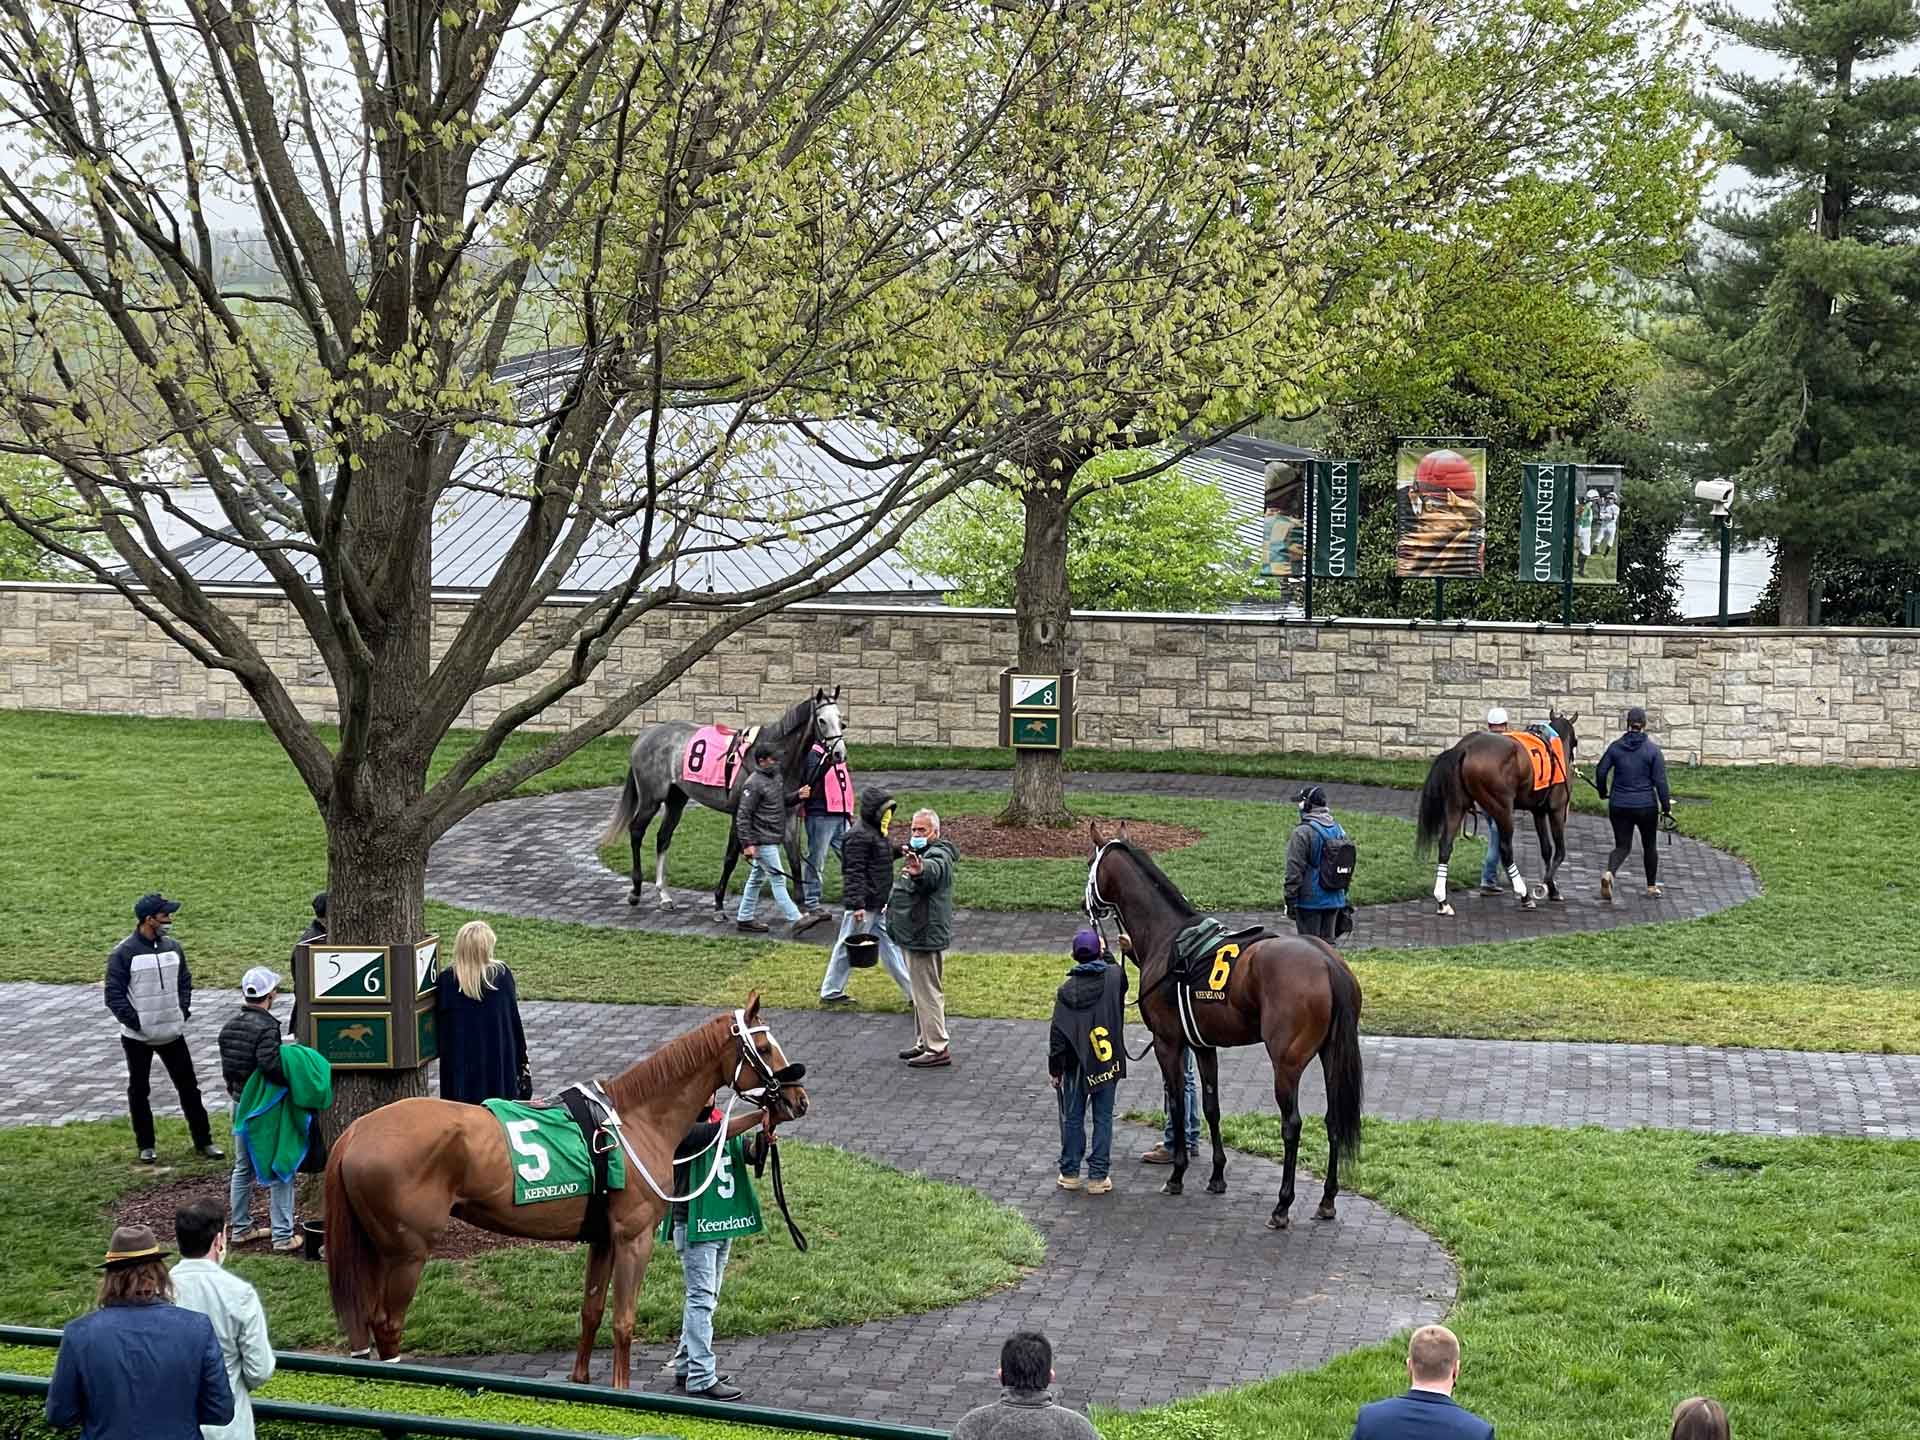 2022 Keeneland Spring Meet Schedule, Tickets, Post Times, and Race